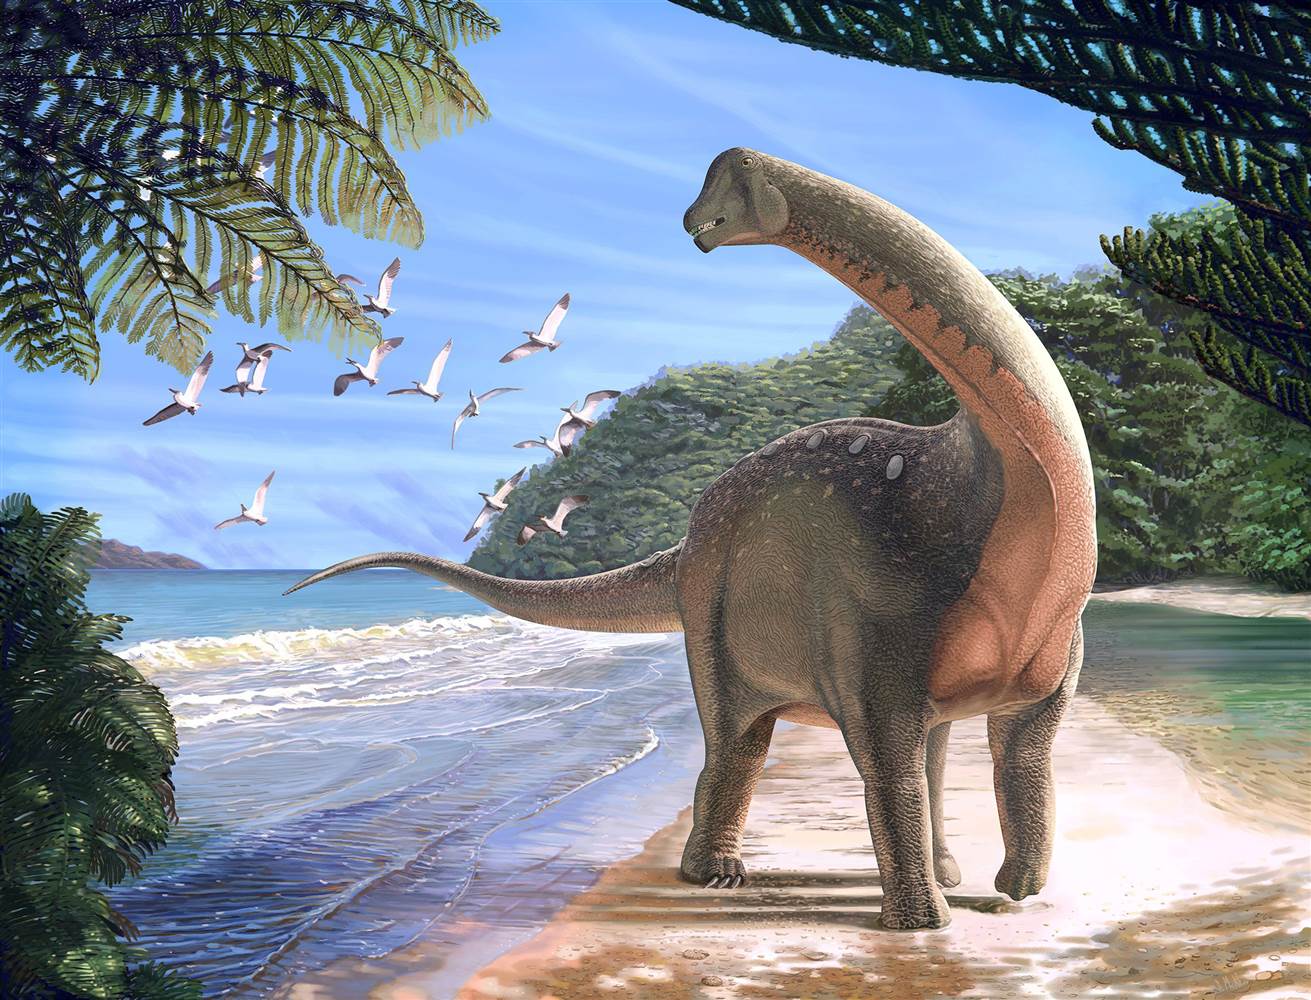 Fossilized remains of dinosaurs found in Egypt linked with African history